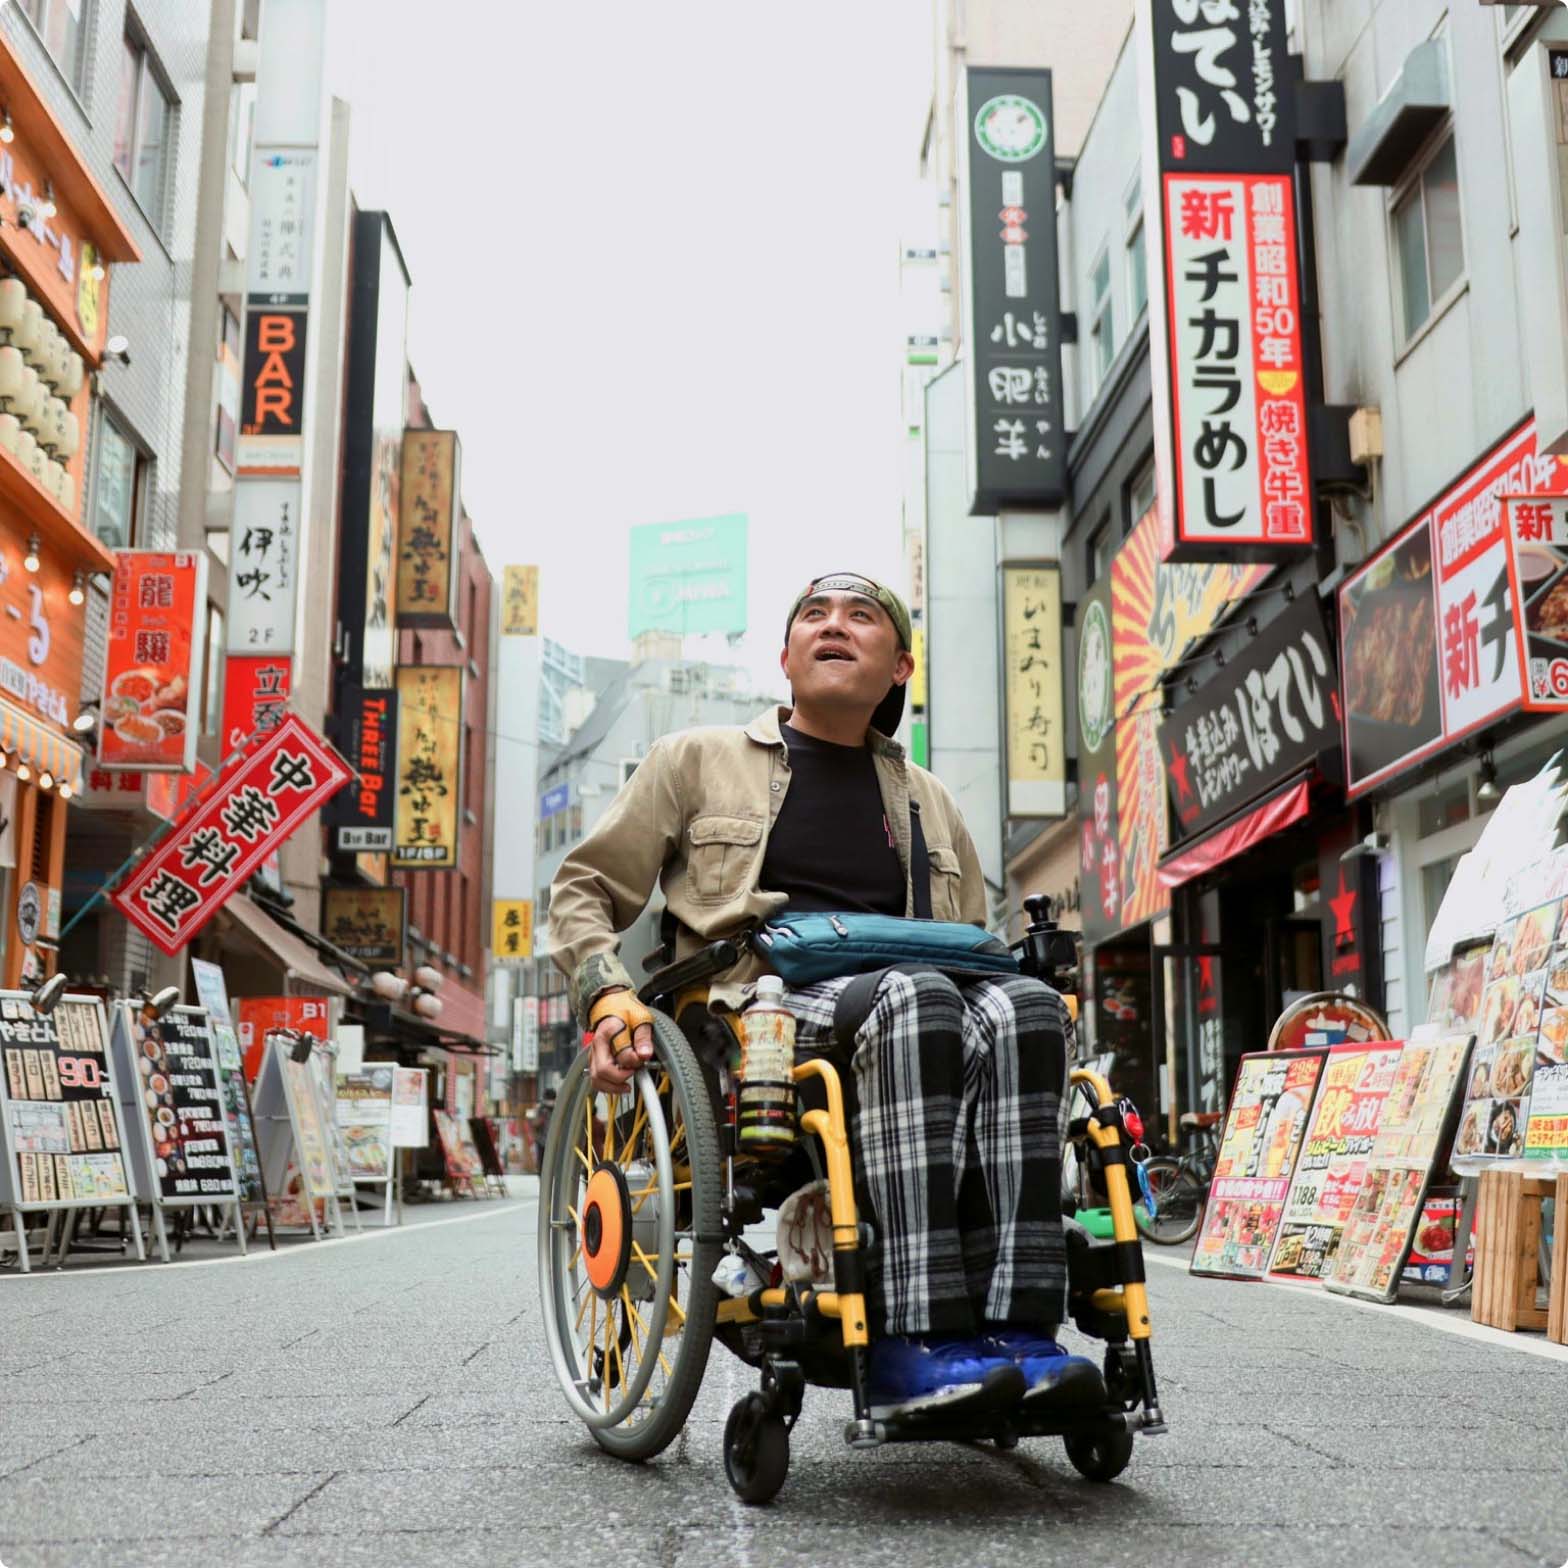 Man in a wheelchair exploring a street in Asia